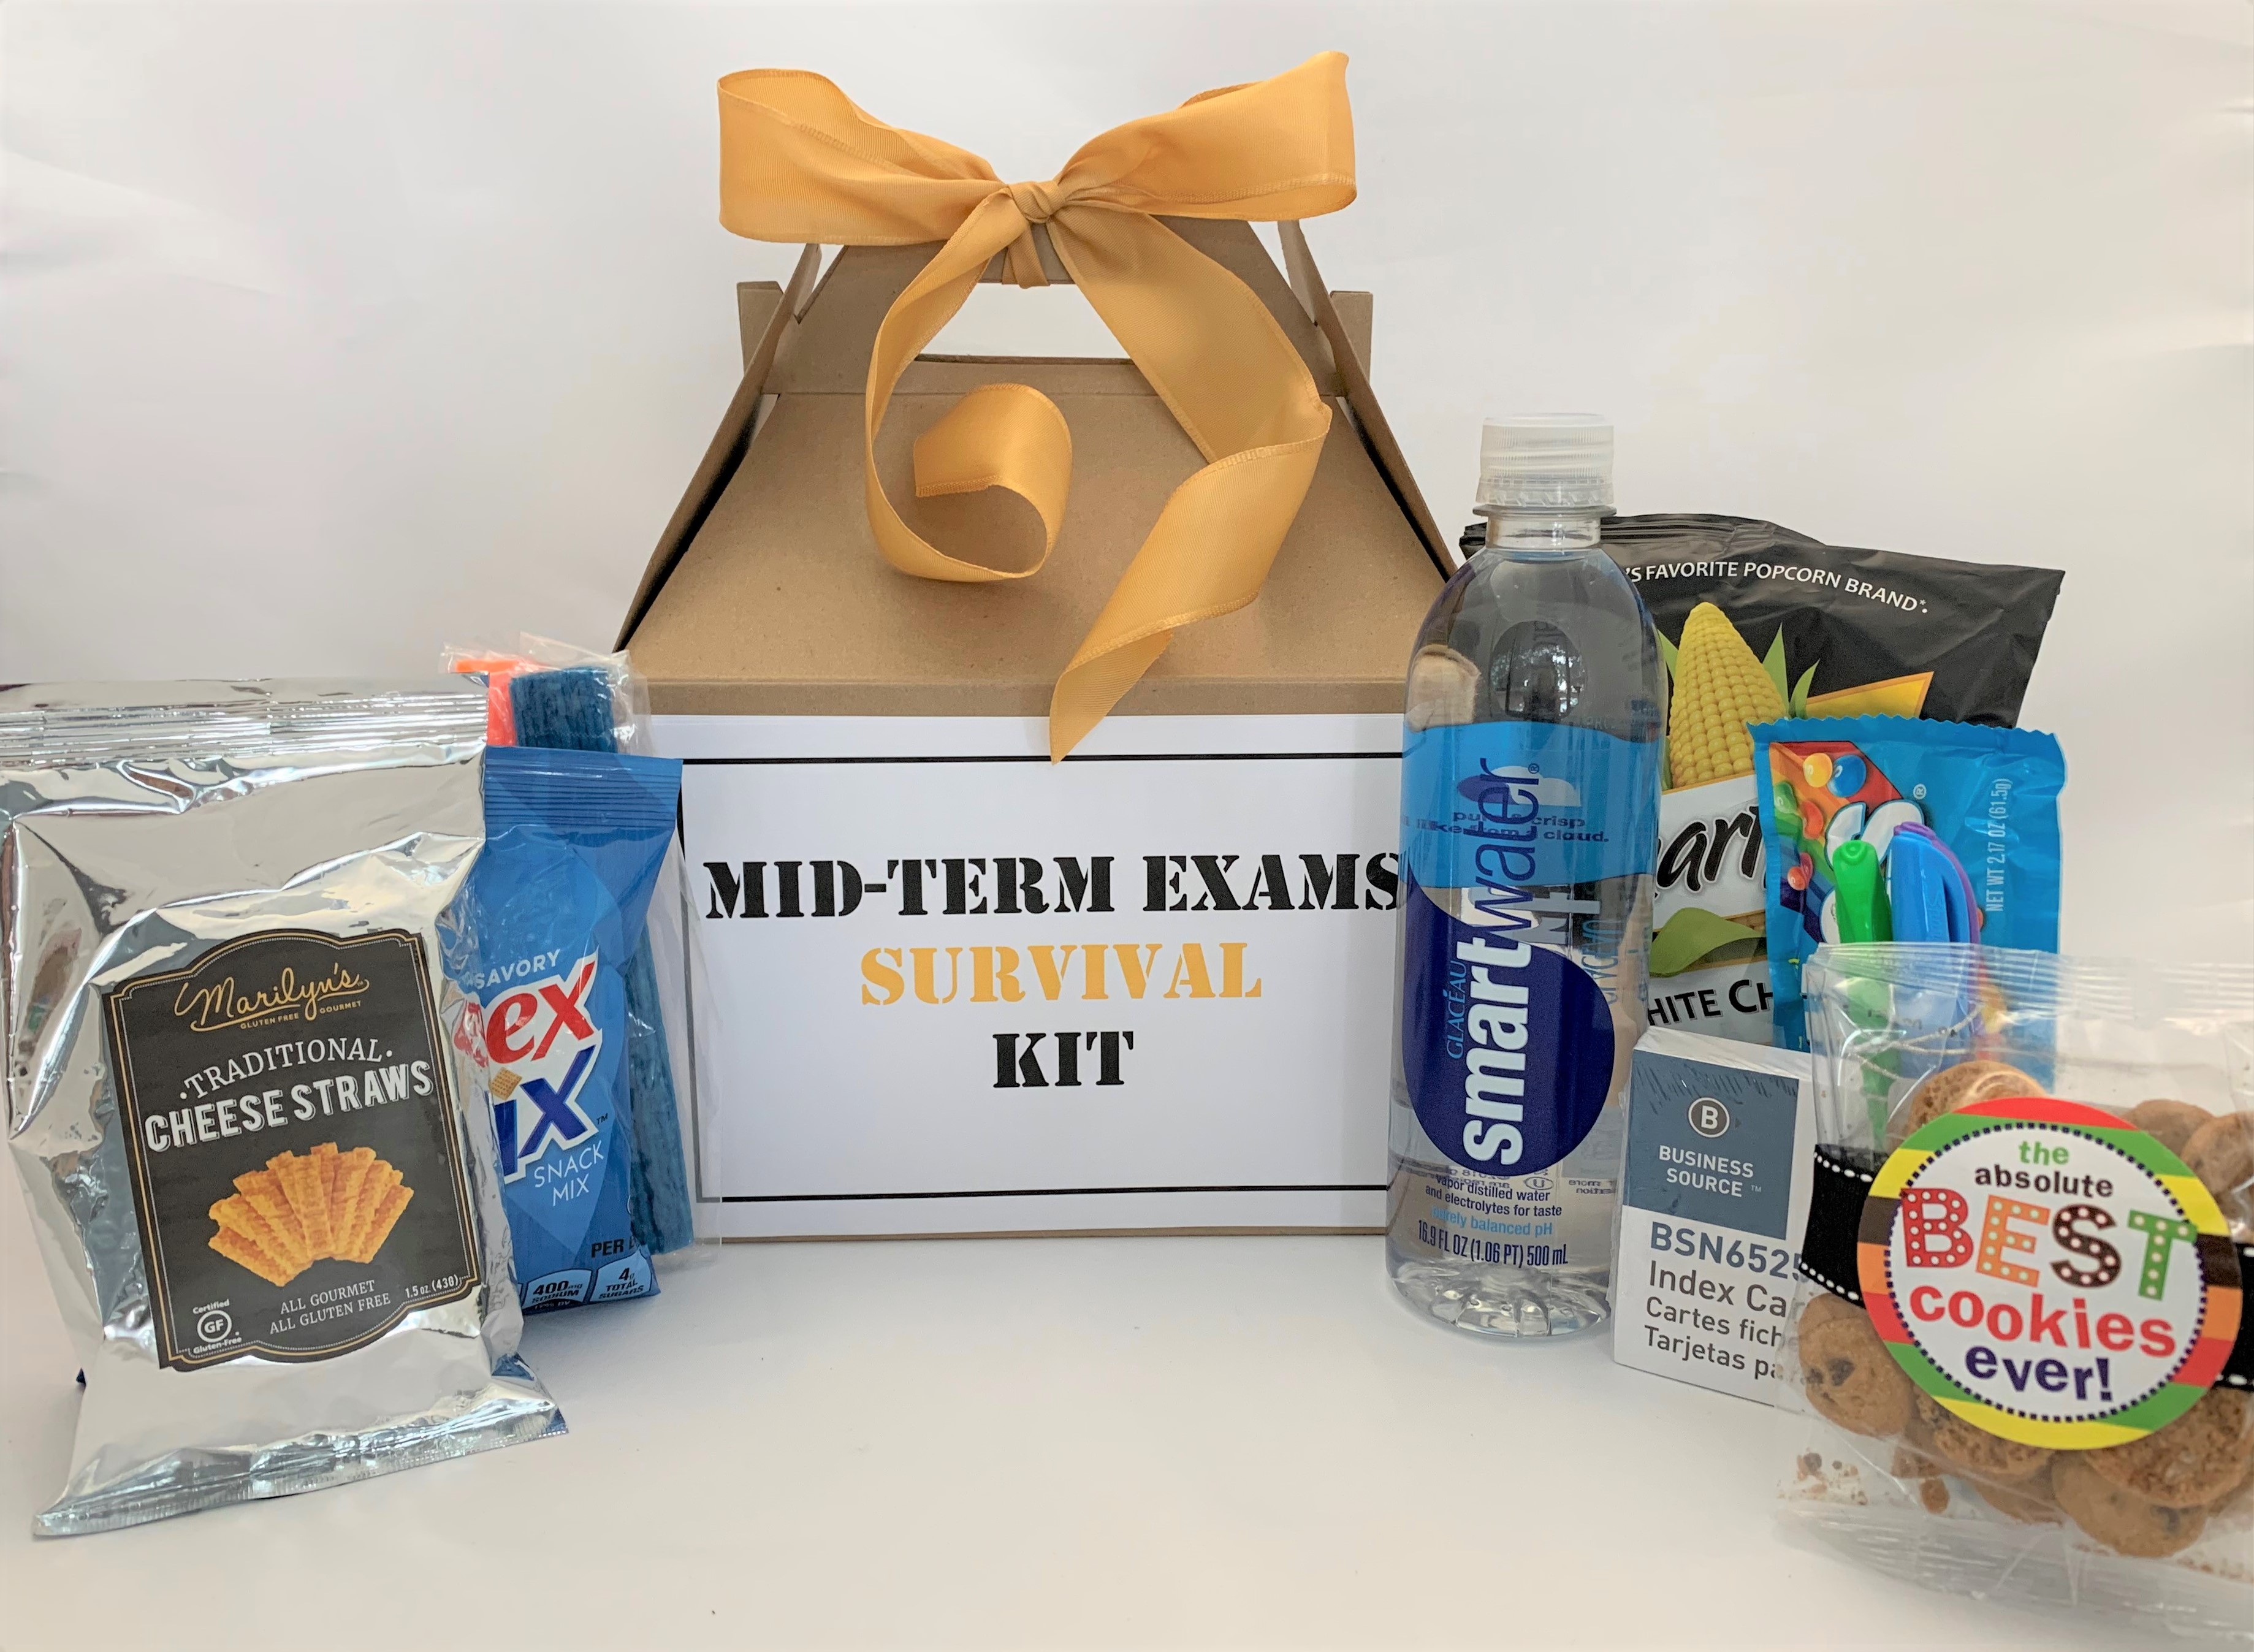 Sensational Mid-Term Exams Survival Kit/Care Package ($38.50 & Up